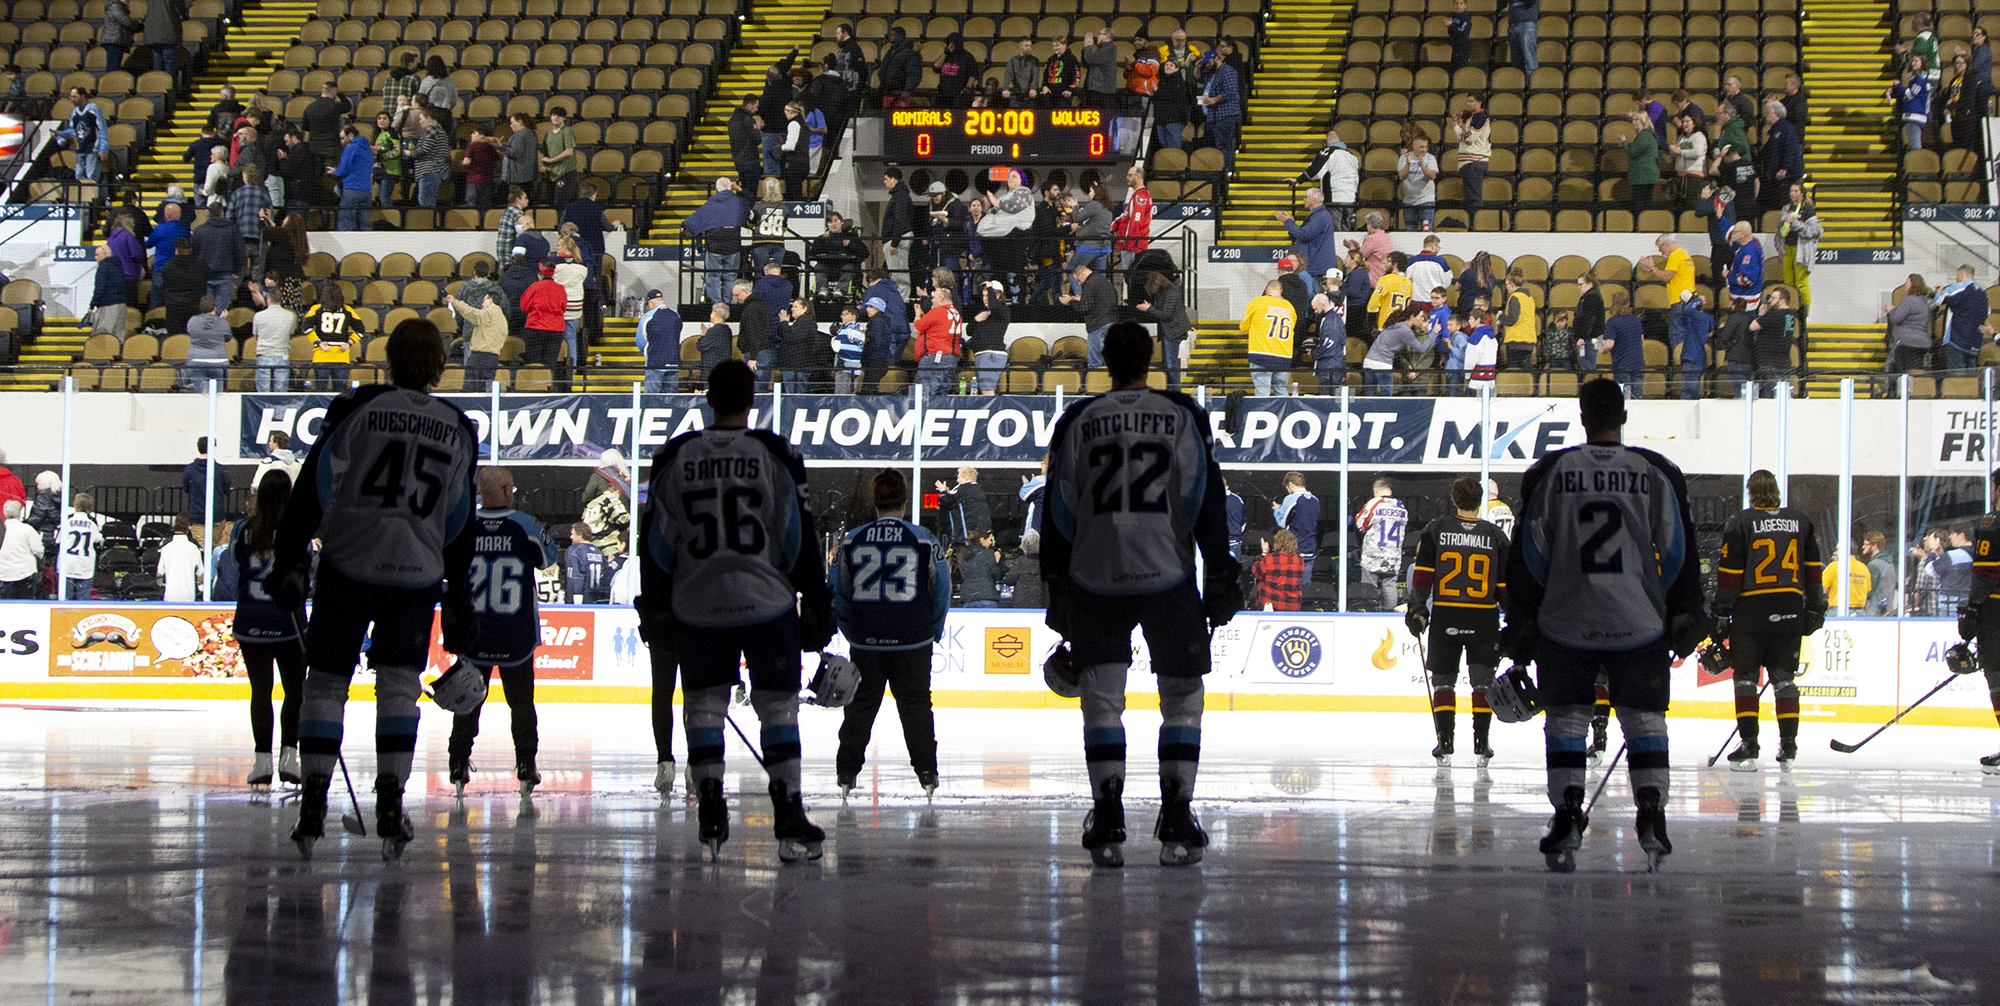 The Milwaukee Admirals stand for the national anthem ahead of a game against the Chicago Wolves.